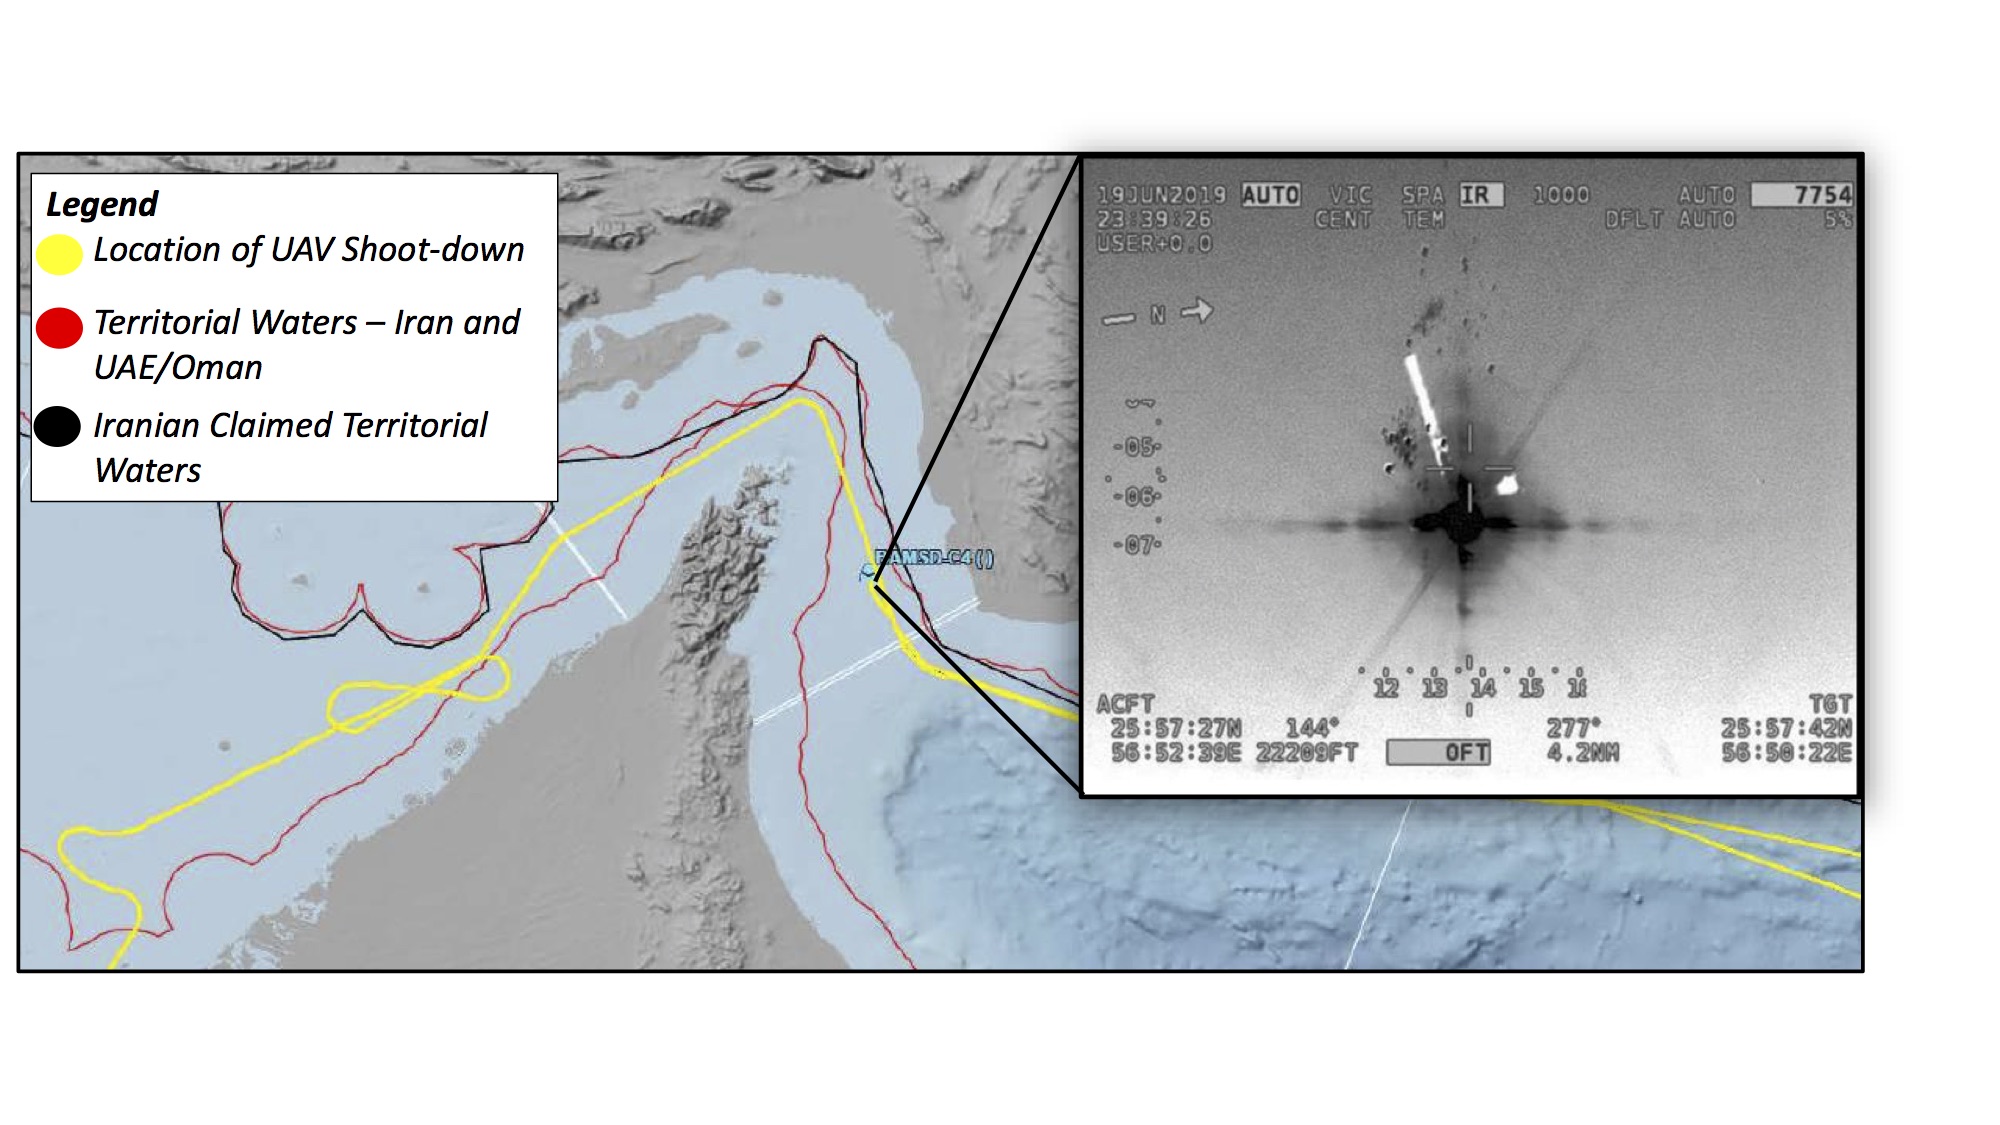 Graphic showing the flight path of the U.S. Navy RQ-4A shot down on June 20, 2019 (U.S. Central Command &amp;mdash Twitter)